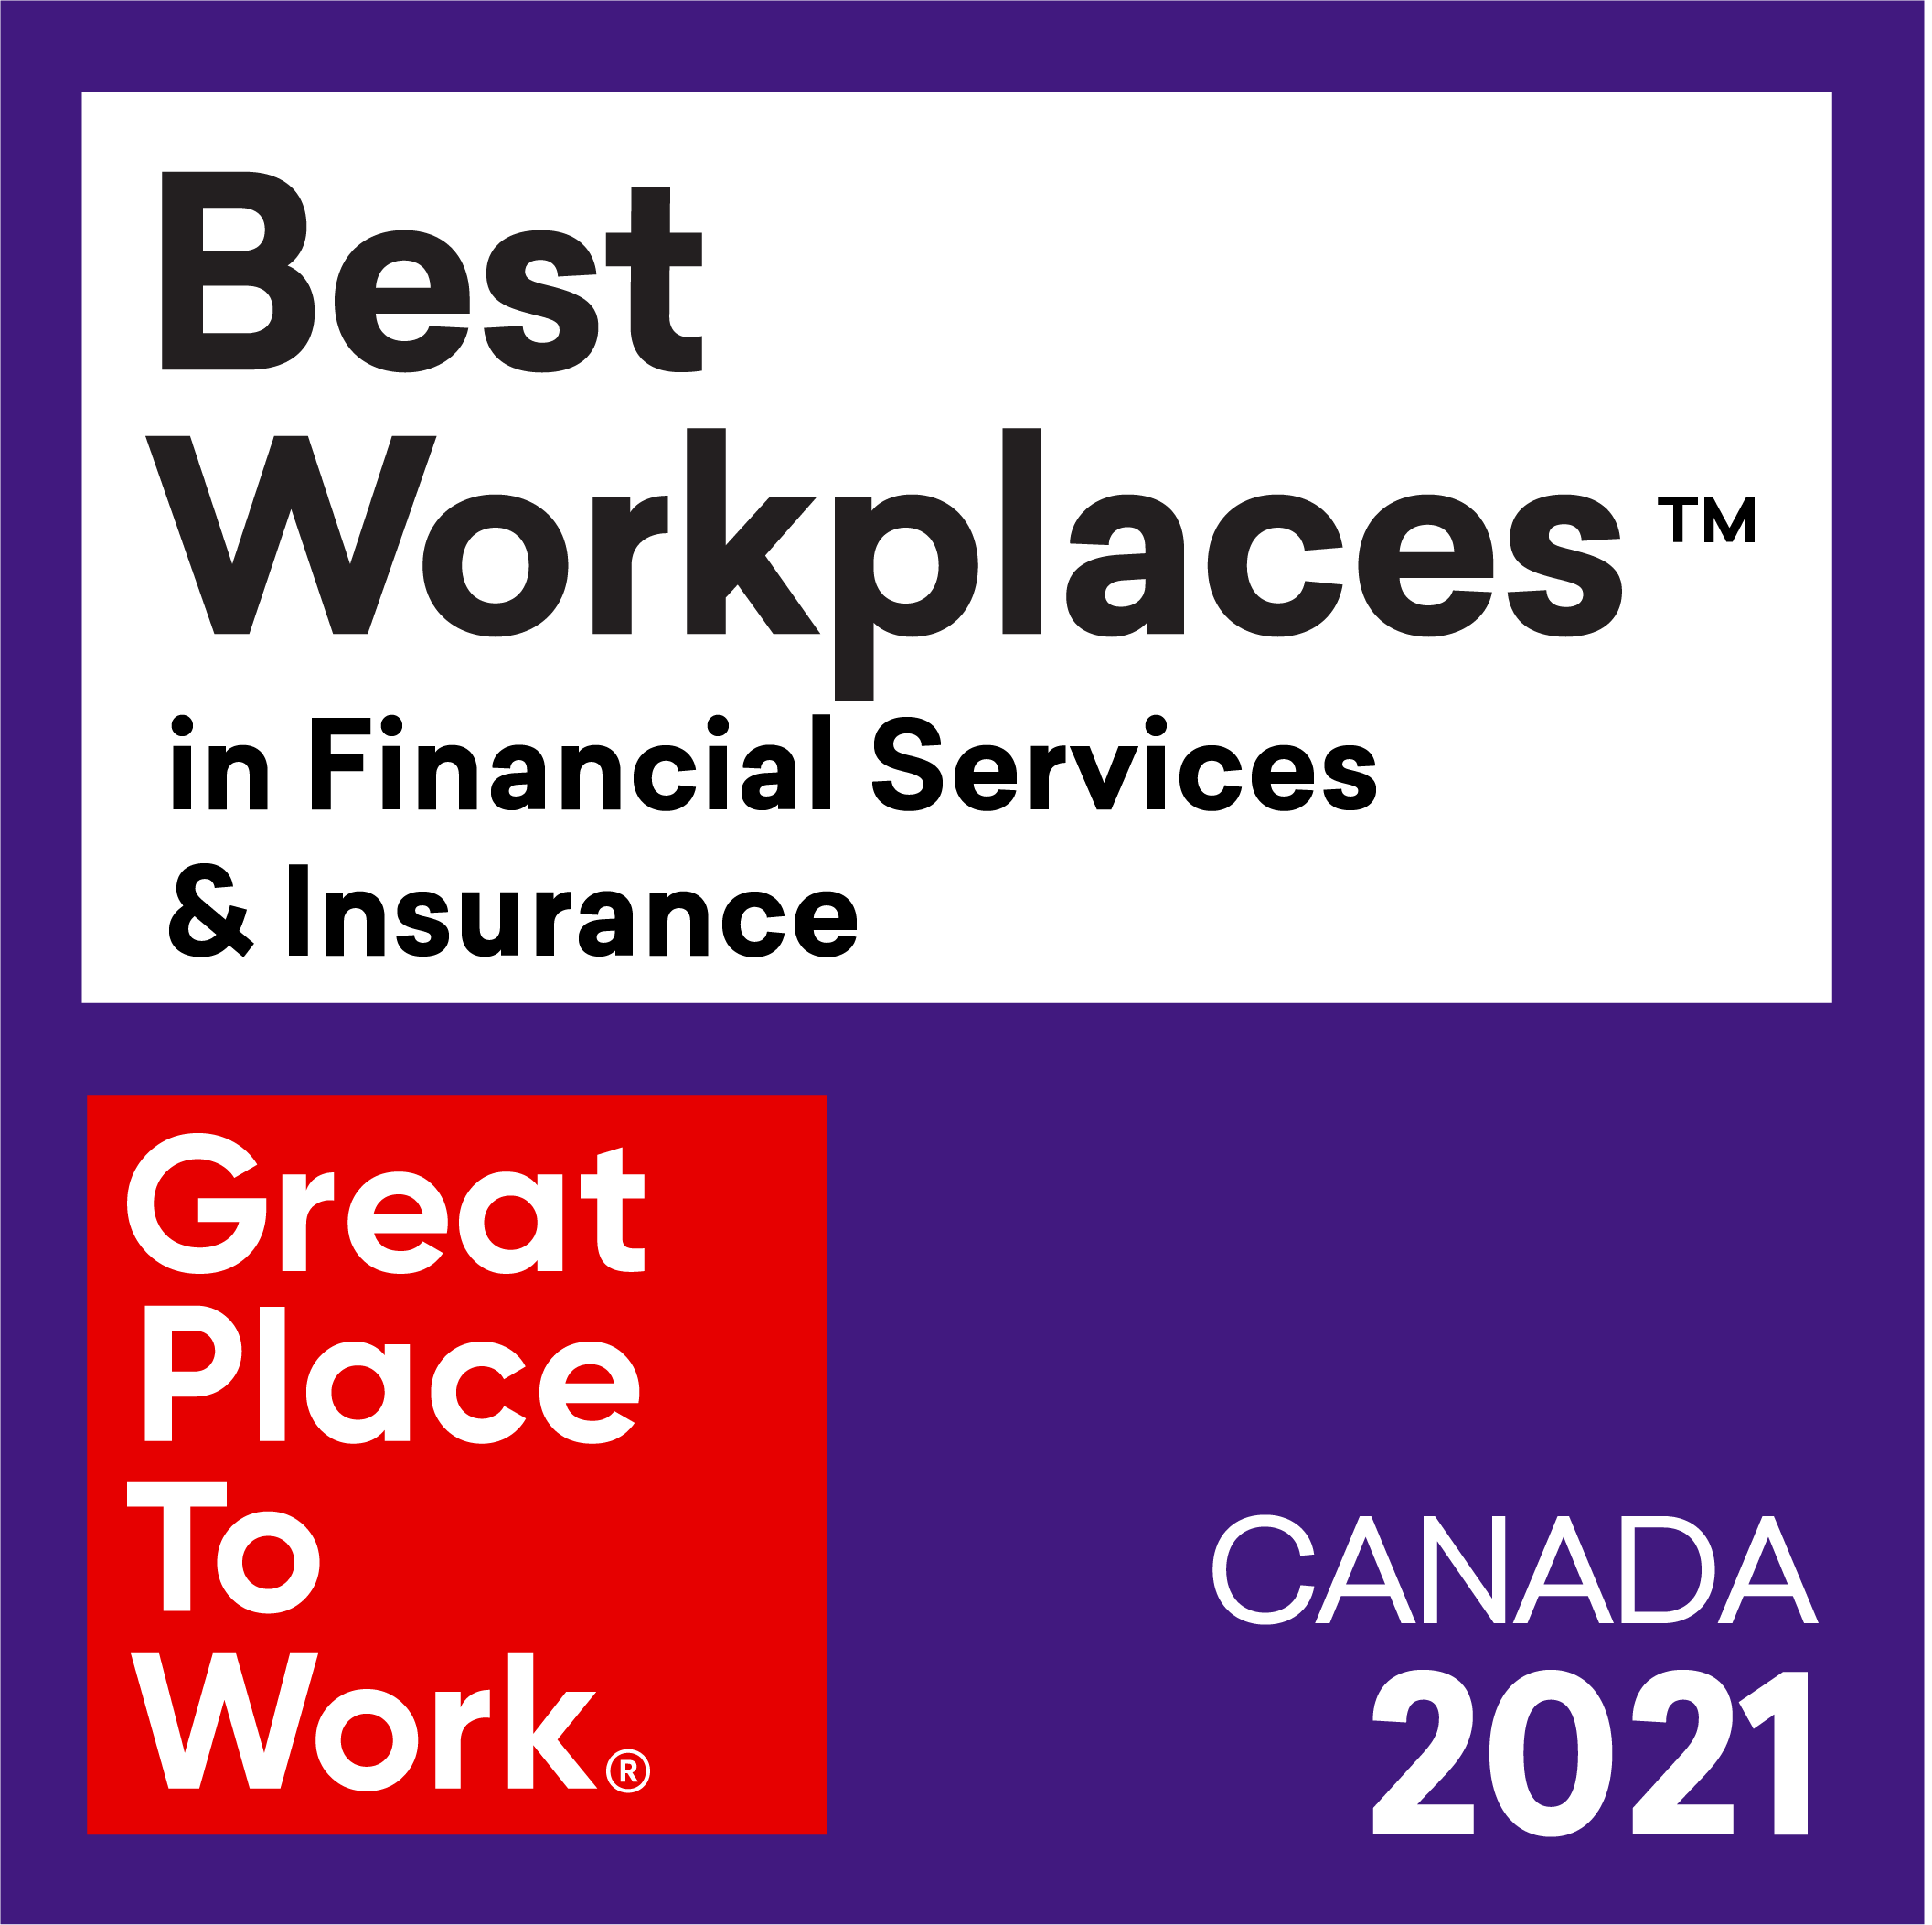 Best Workplaces in Financial Services & Insurance Great Place to Work registered trademark Canada 2020 trademark. Logo.